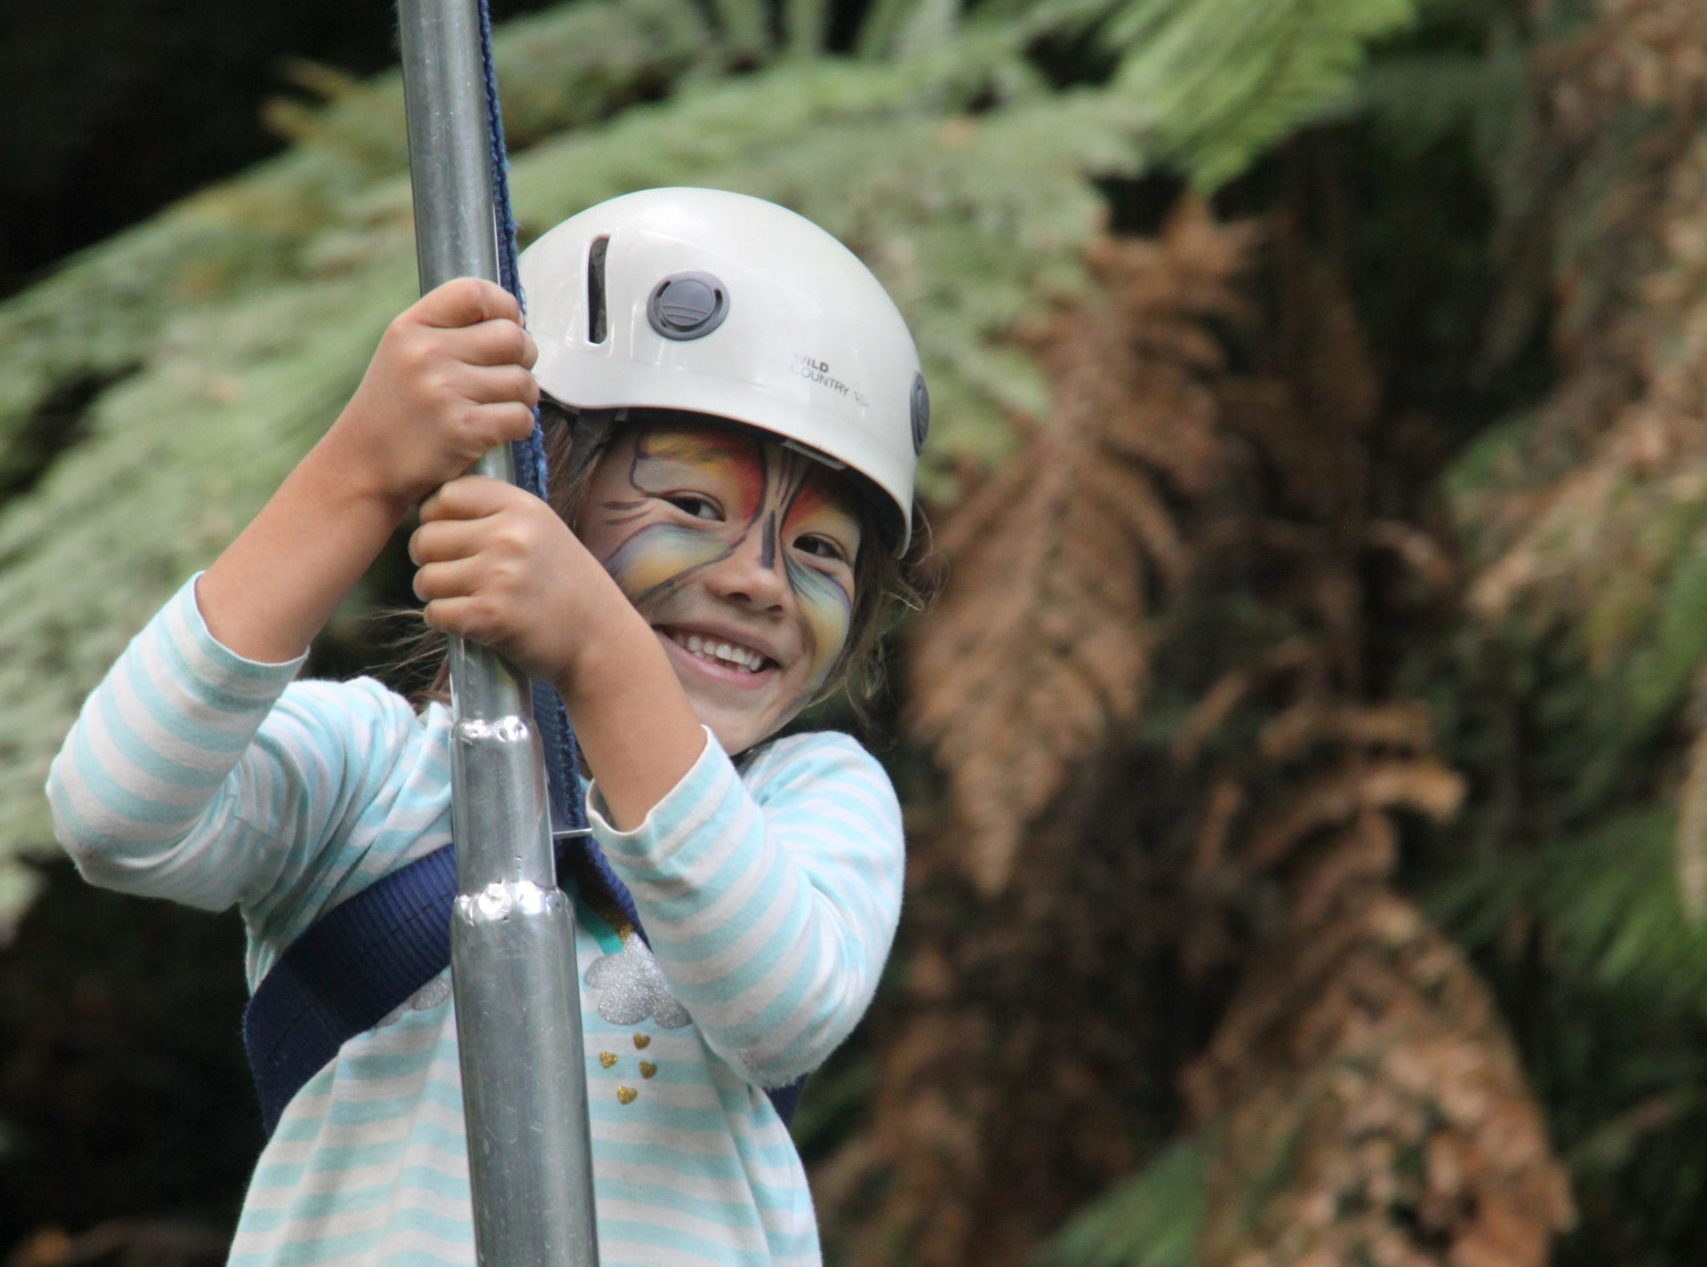 A young girl wearing a helmet going down a zipline with her face painted like a butterfly